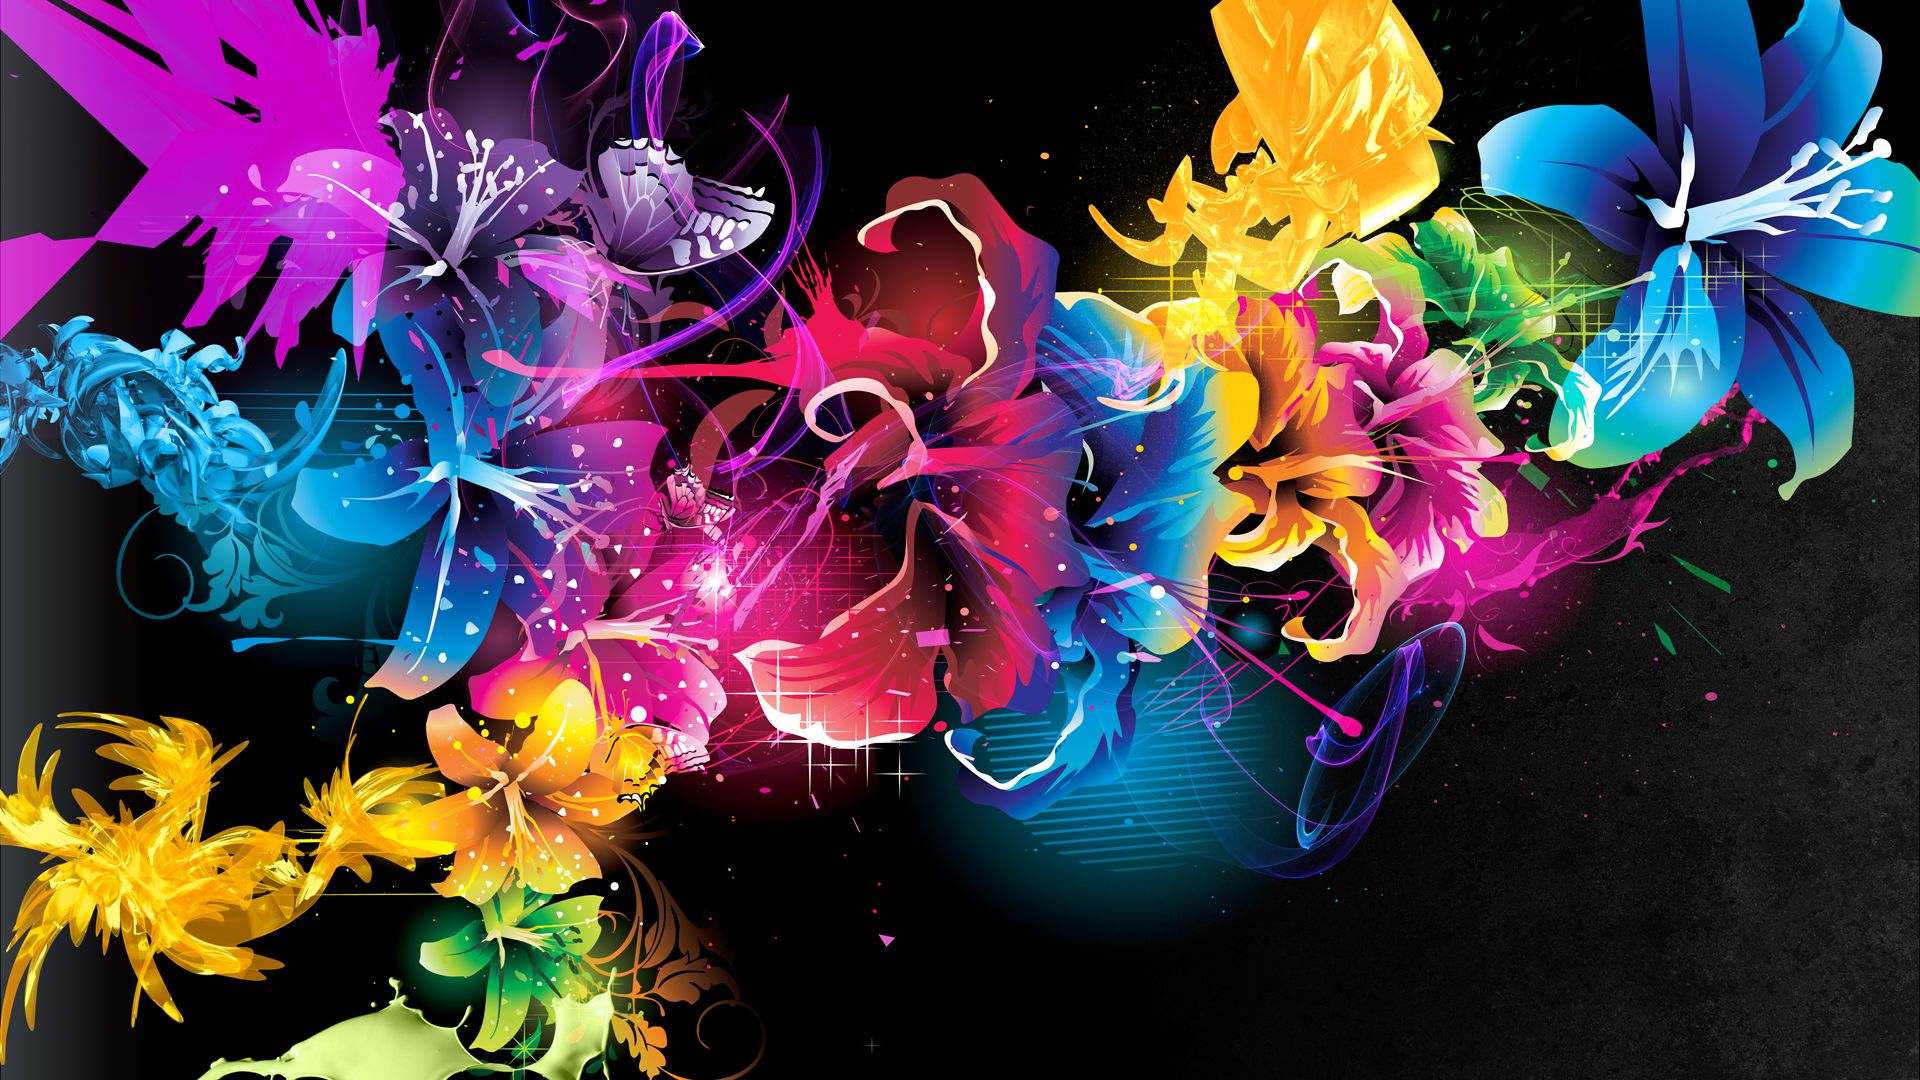 Colorful Flower Abstract Art Wallpaper Flower Abstract Art